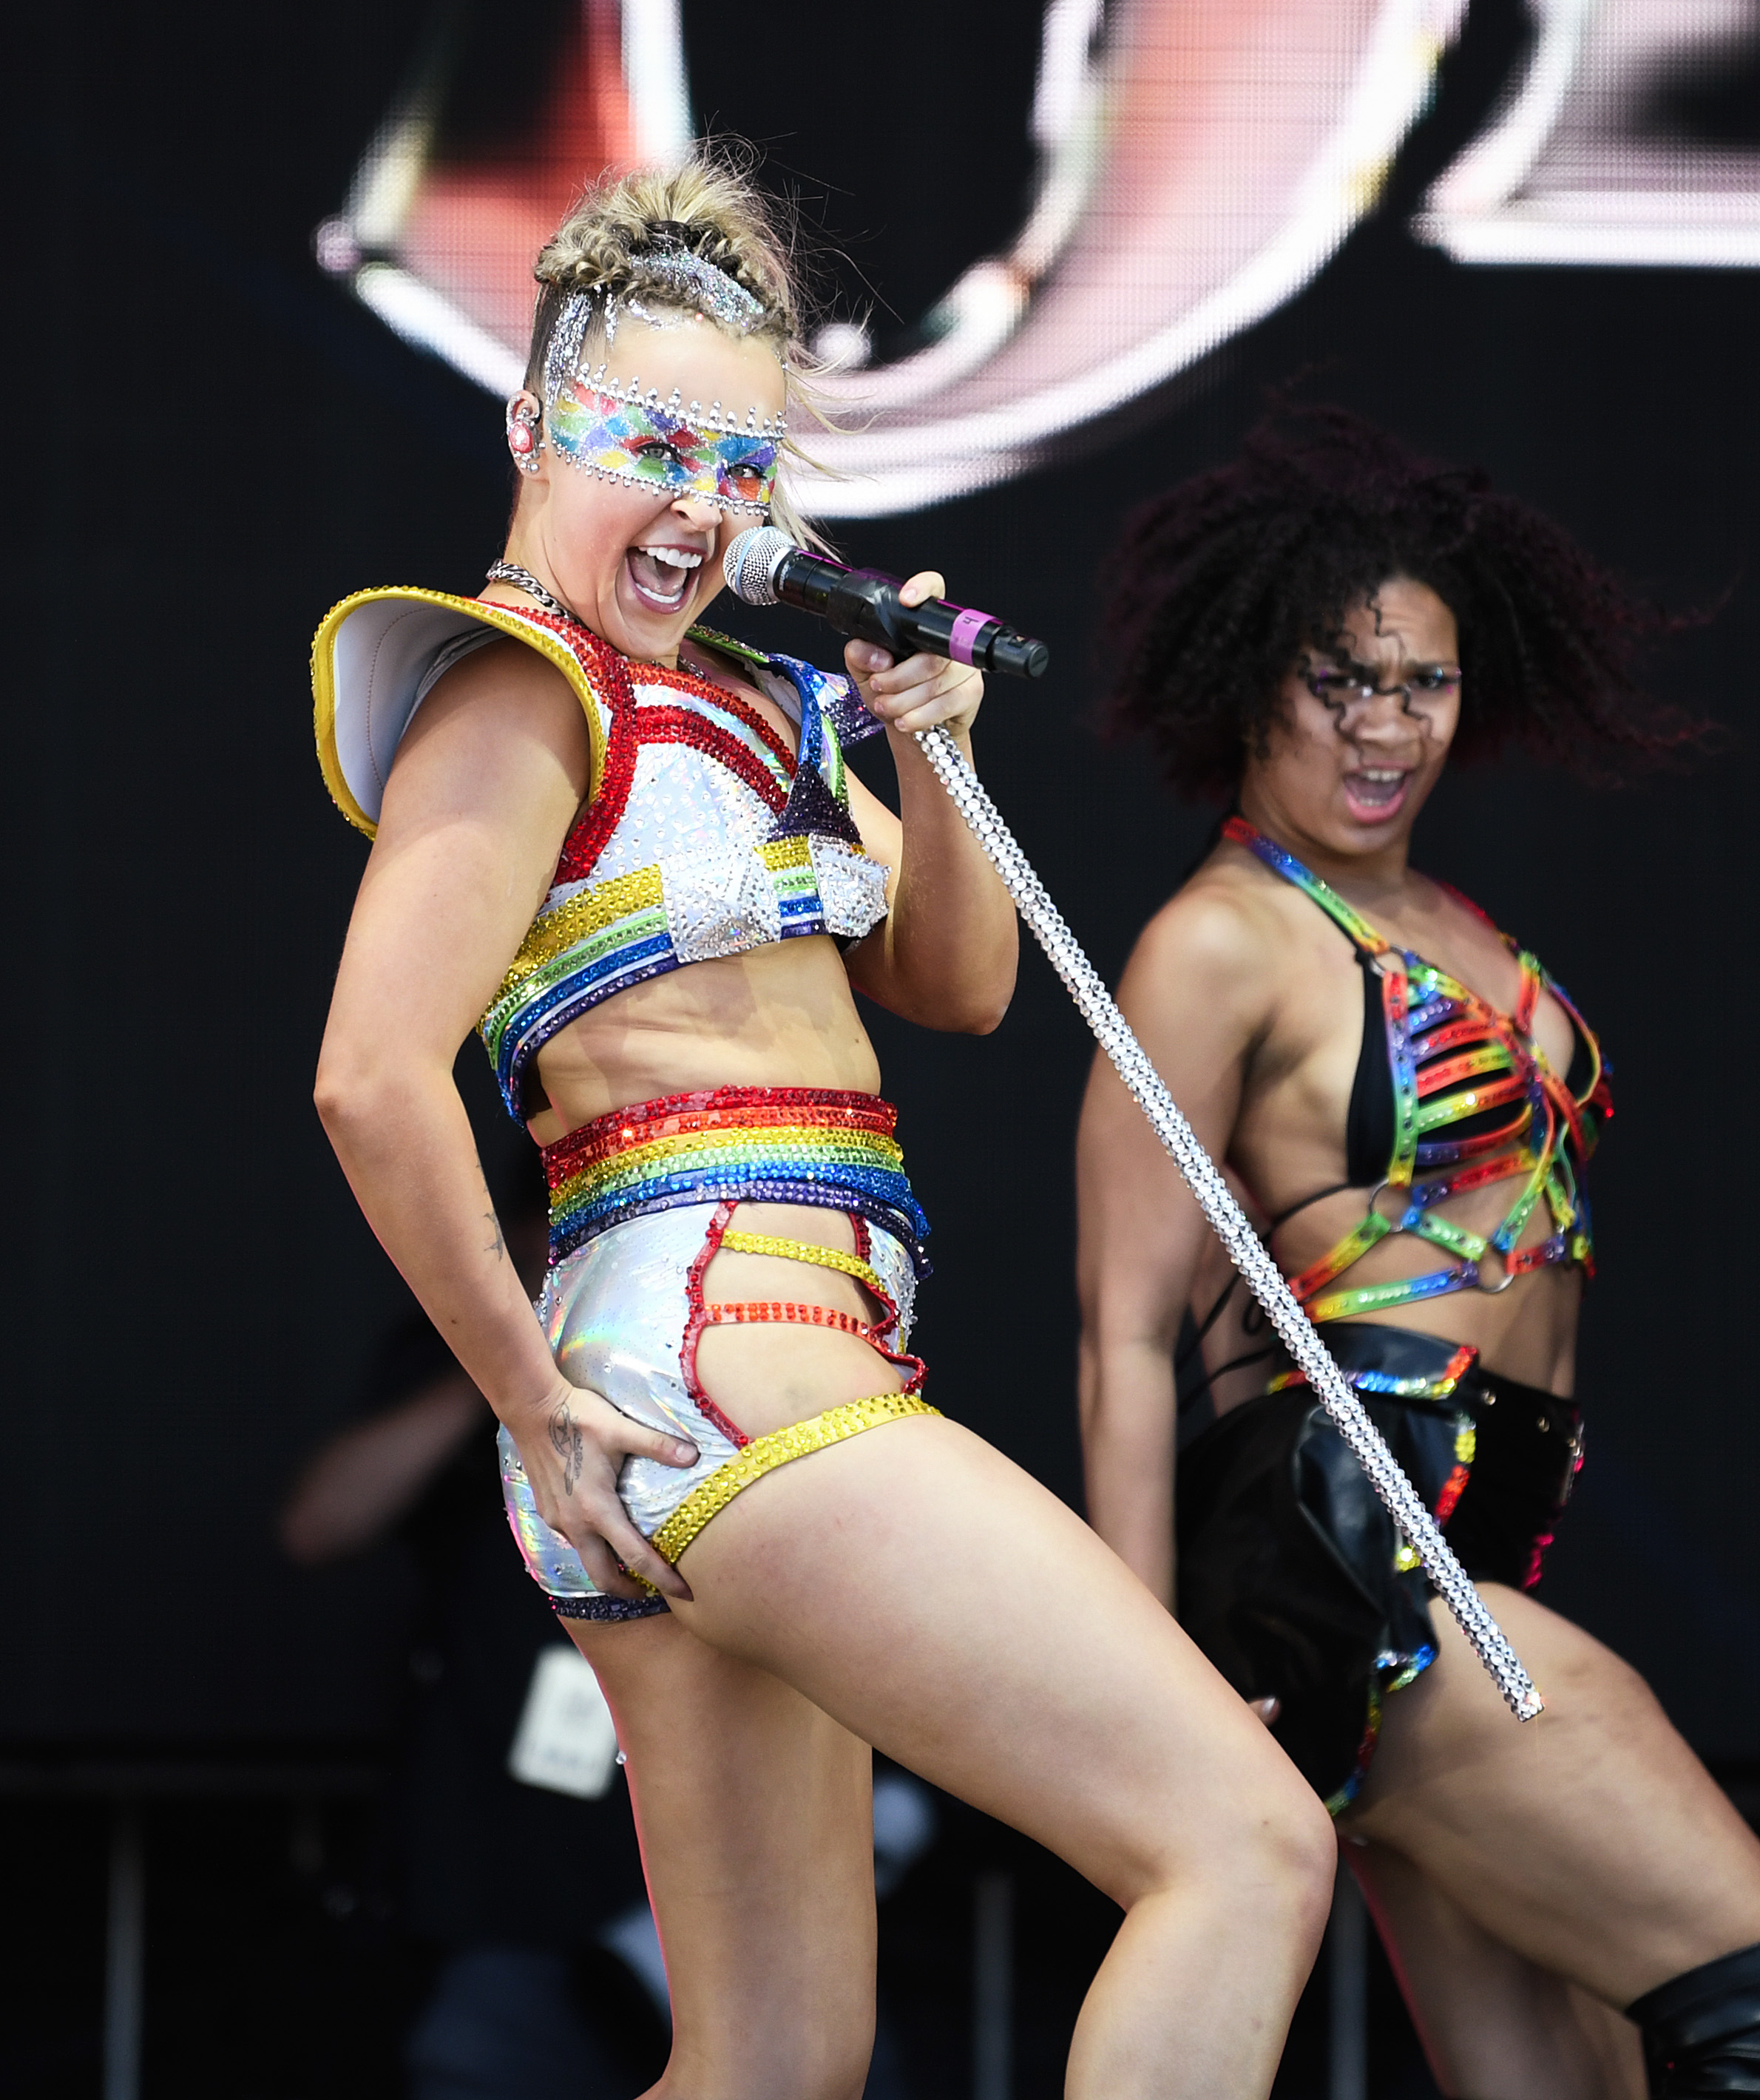 JoJo Siwa and a dancer perform on stage. JoJo wears a rainbow-themed, sequin-studded outfit with a matching visor, and holds a sparkling mic stand